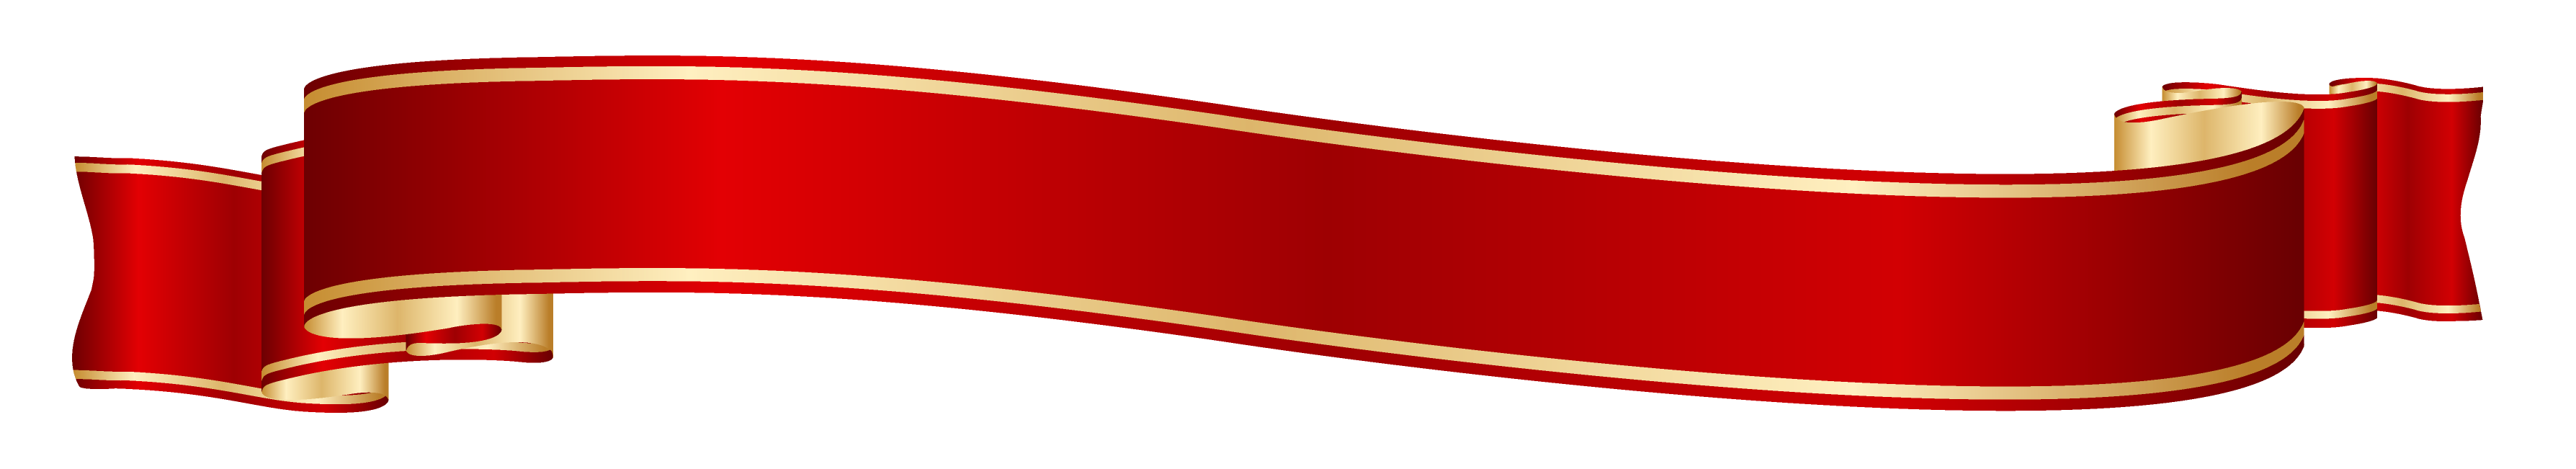 clipart banner red ribbon